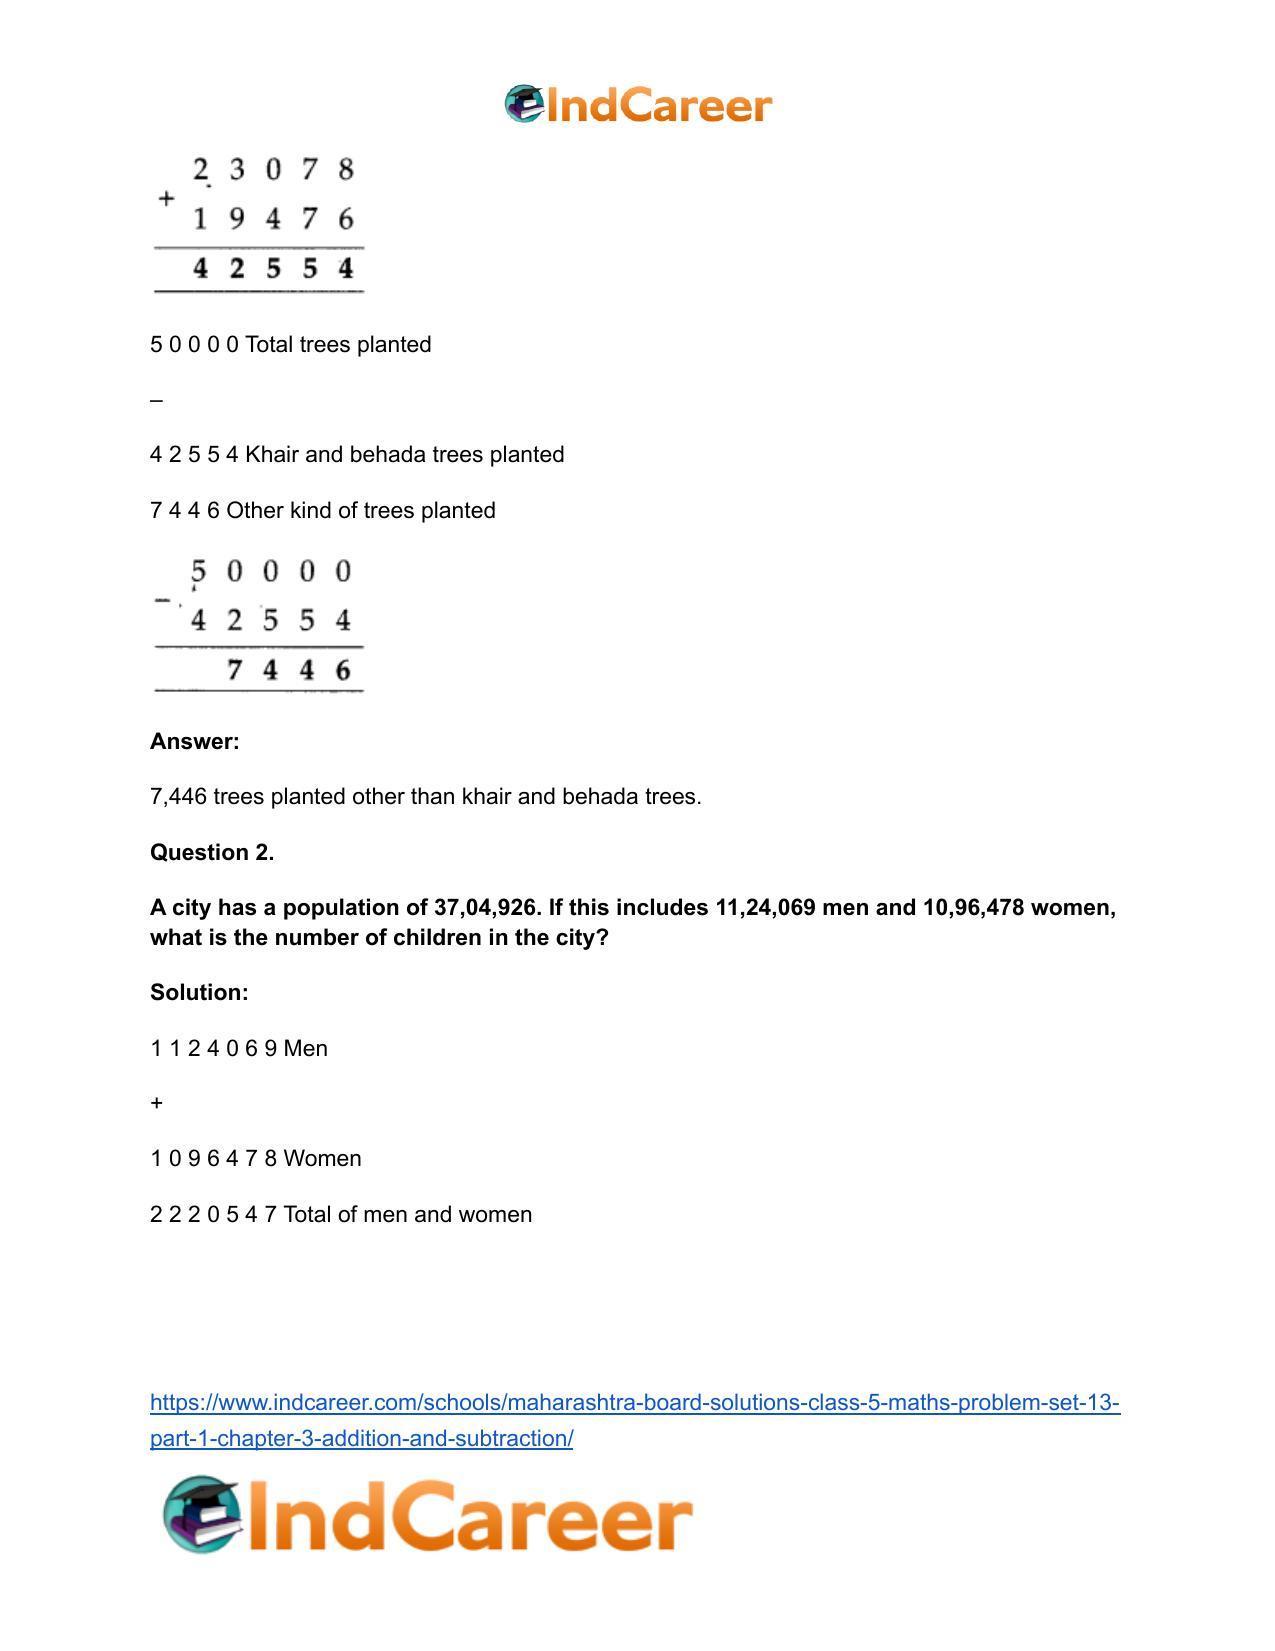 Maharashtra Board Solutions Class 5-Maths (Problem Set 13) - Part 1: Chapter 3- Addition and Subtraction - Page 3